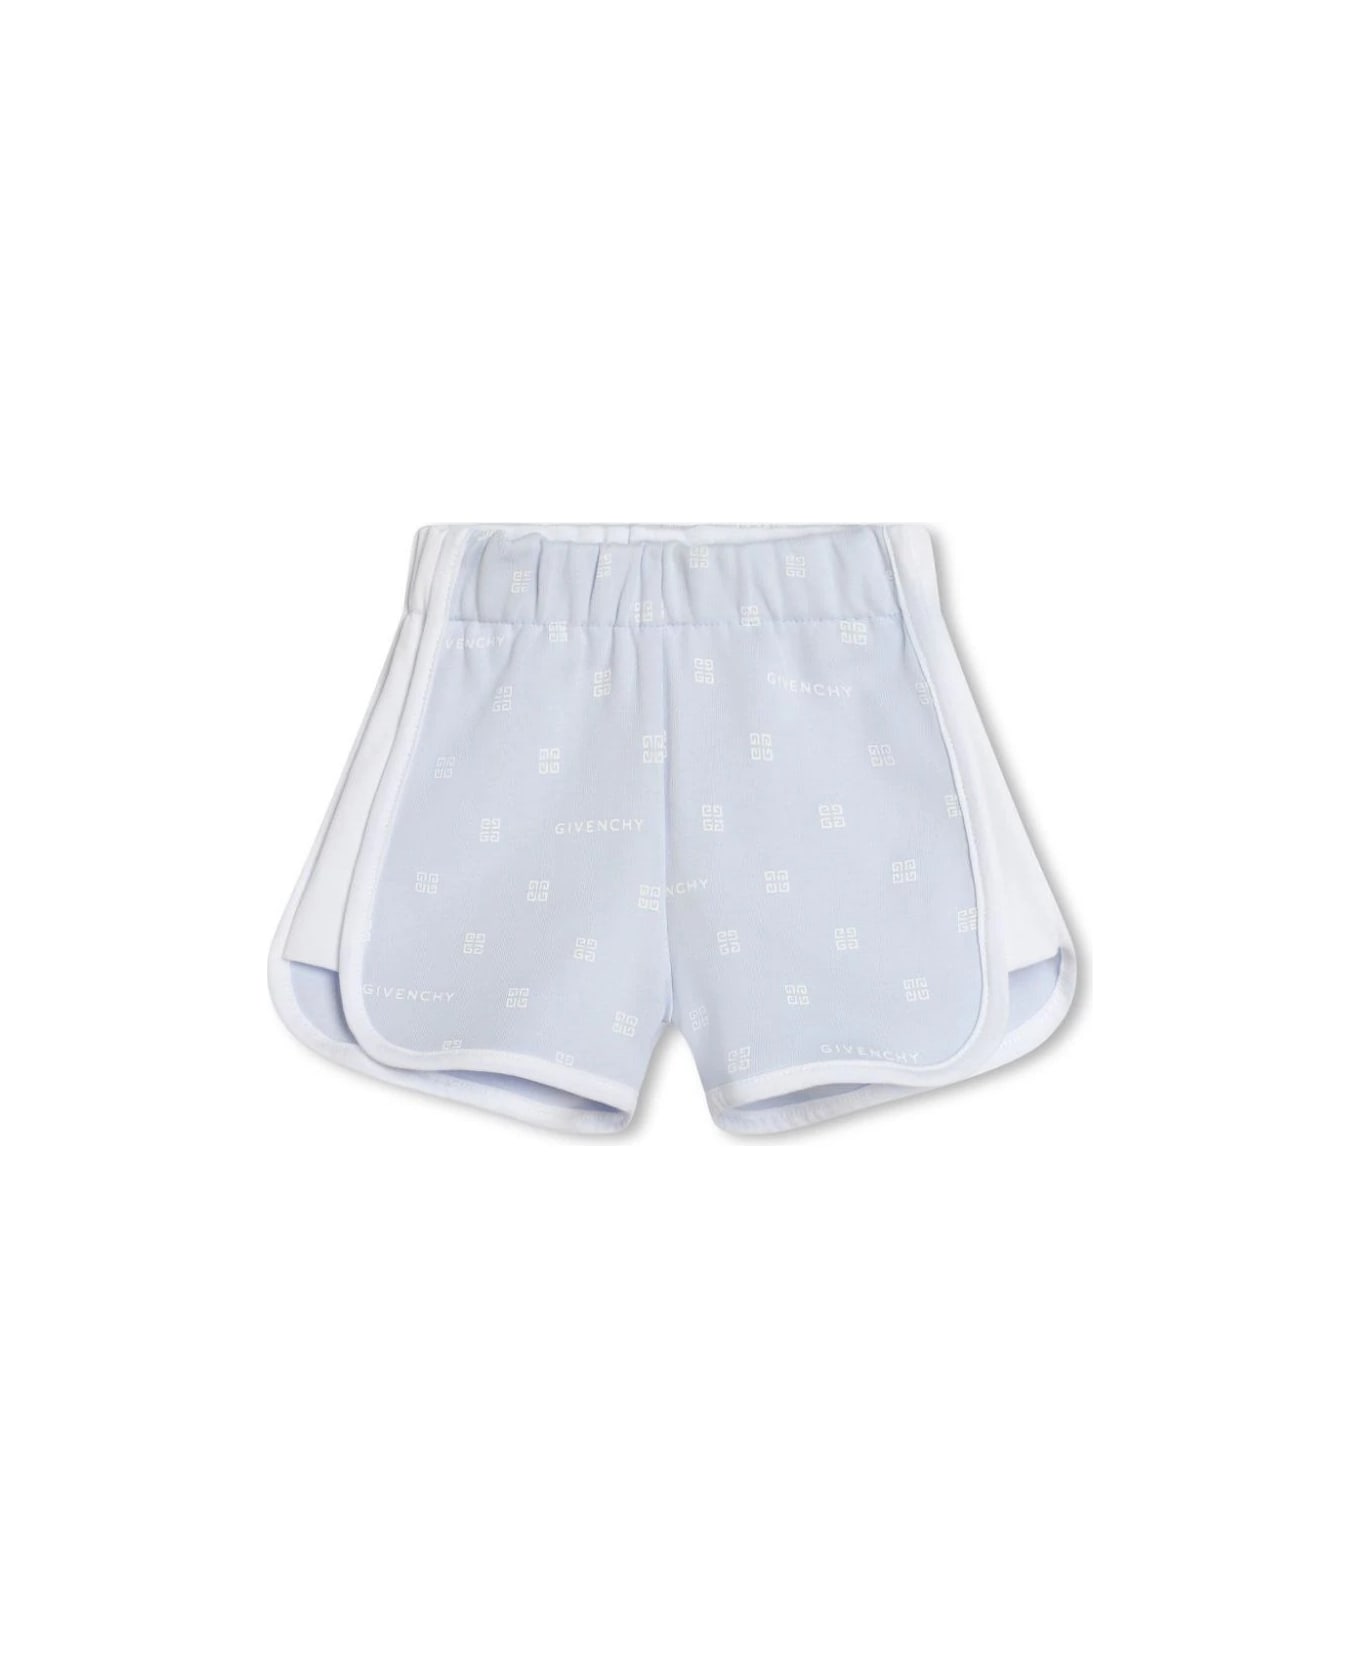 Givenchy White And Light Blue Set With T-shirt, Shorts And Bandana - Blue ボディスーツ＆セットアップ